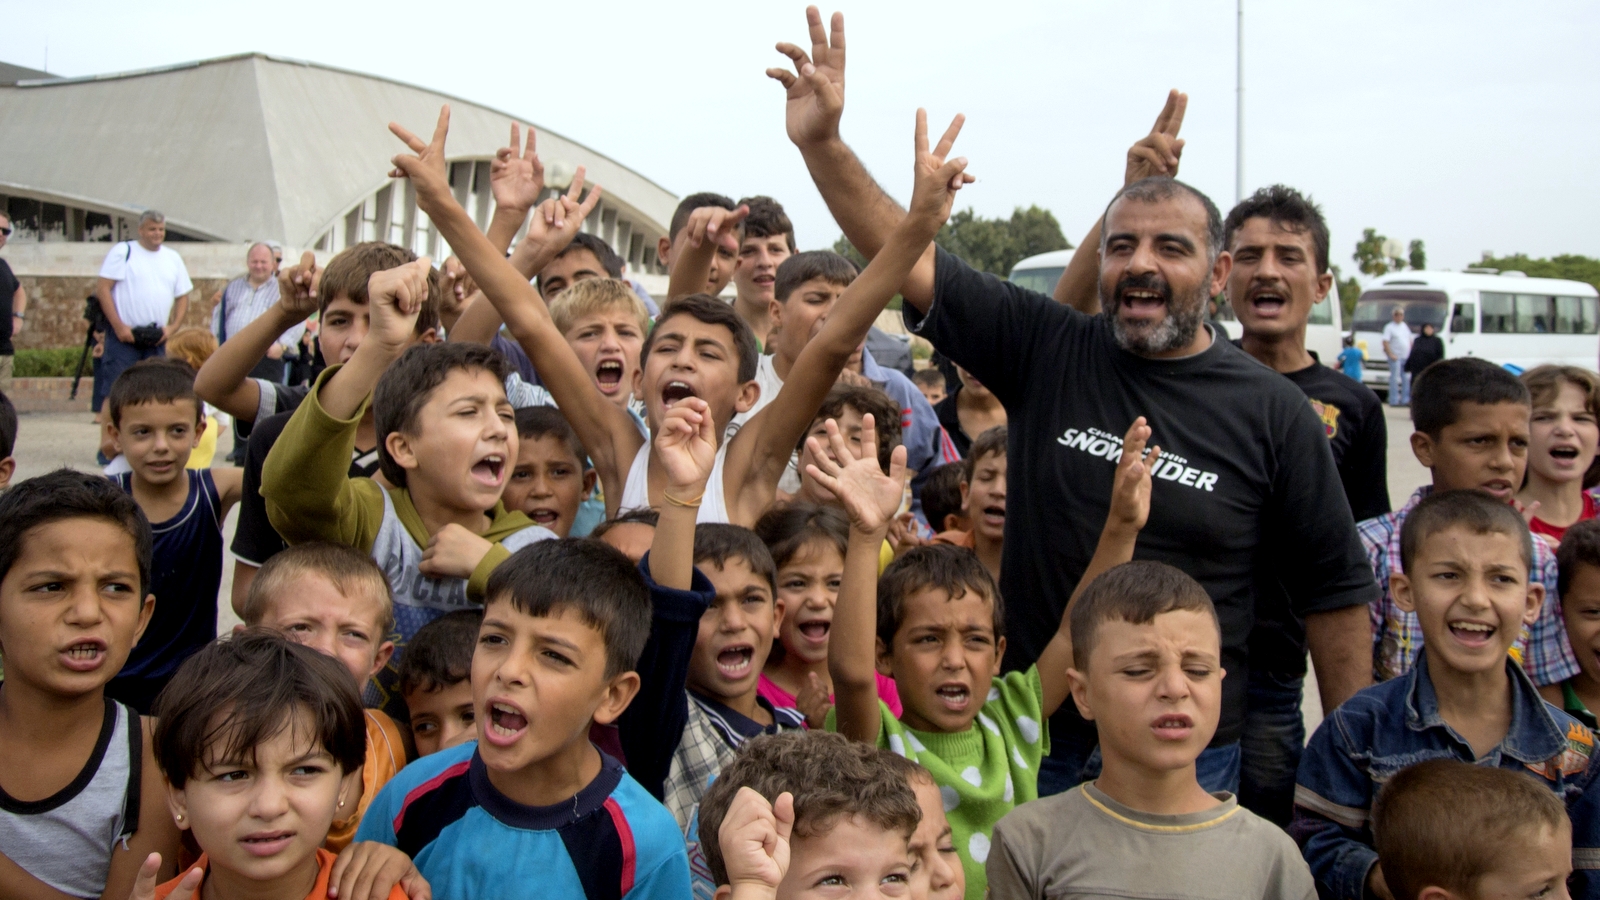 Refugees kids shout "Thank you, Putin!" while posing for journalists at a camp in Latakia, Syria, Friday, Oct. 23, 2015. At a refugee camp in Latakia, which houses several thousand mostly Alawite refugees from other provinces of Syria. (AP Photo/Vladimir Isachenkov)